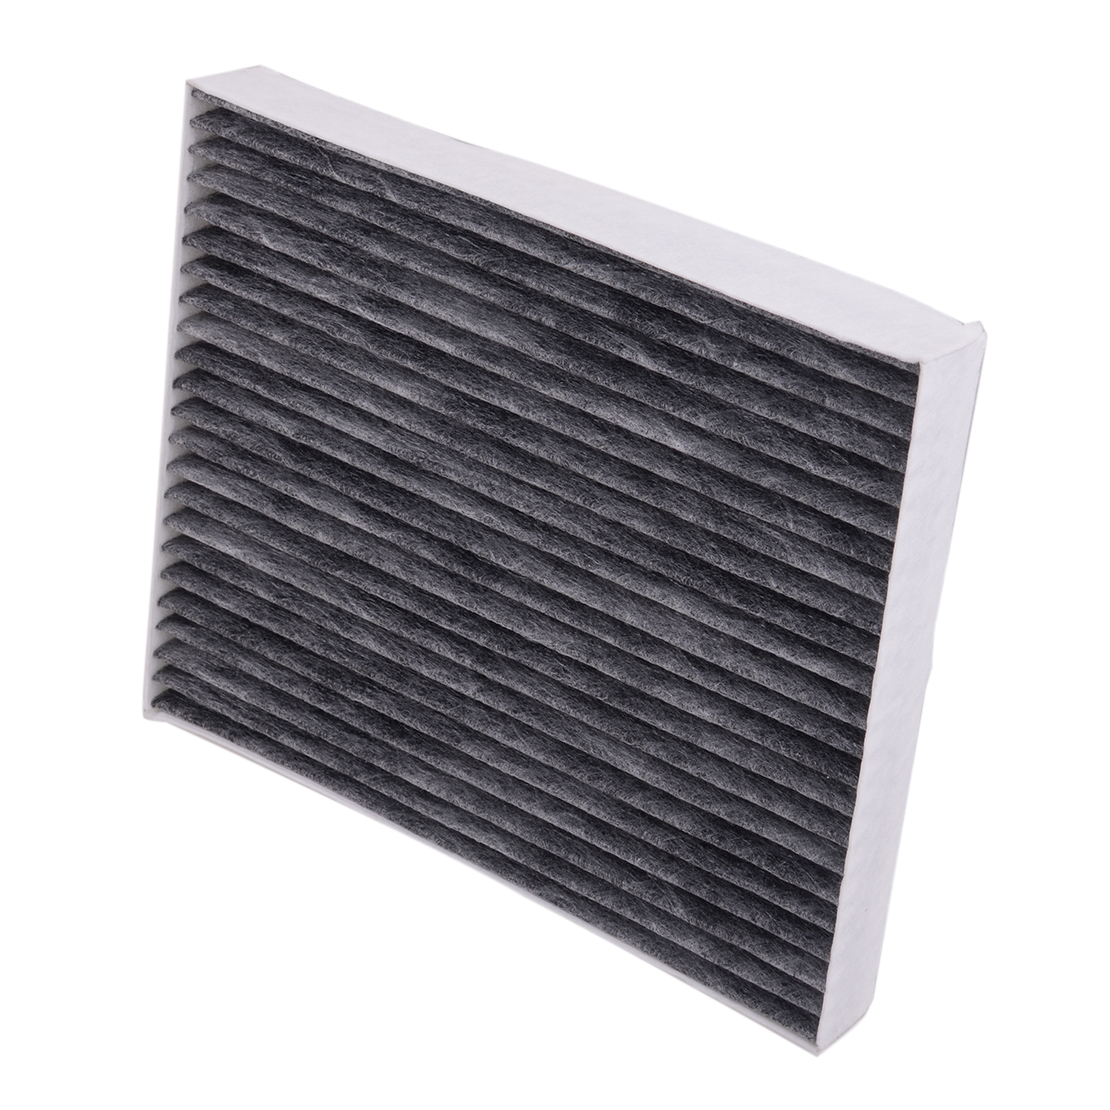 Cabin Air Filter fit for Hyundai Accent 19-20 Elantra Kia Forte Rio 97133-F2000 | eBay 2019 Kia Forte Cabin Air Filter Replacement